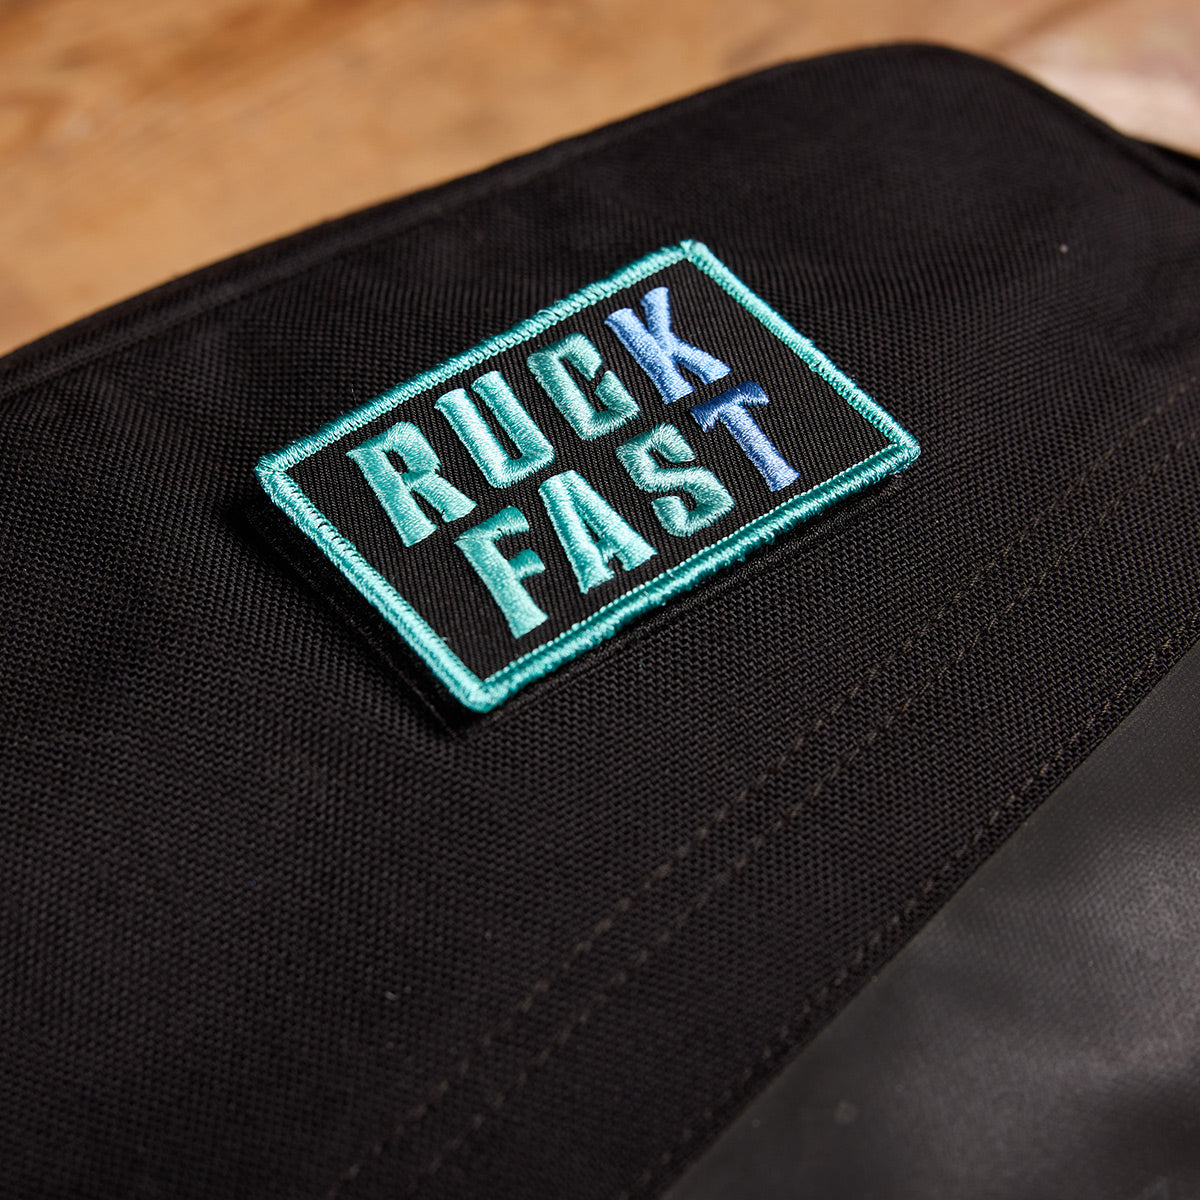 Patch - GORUCK First Aid